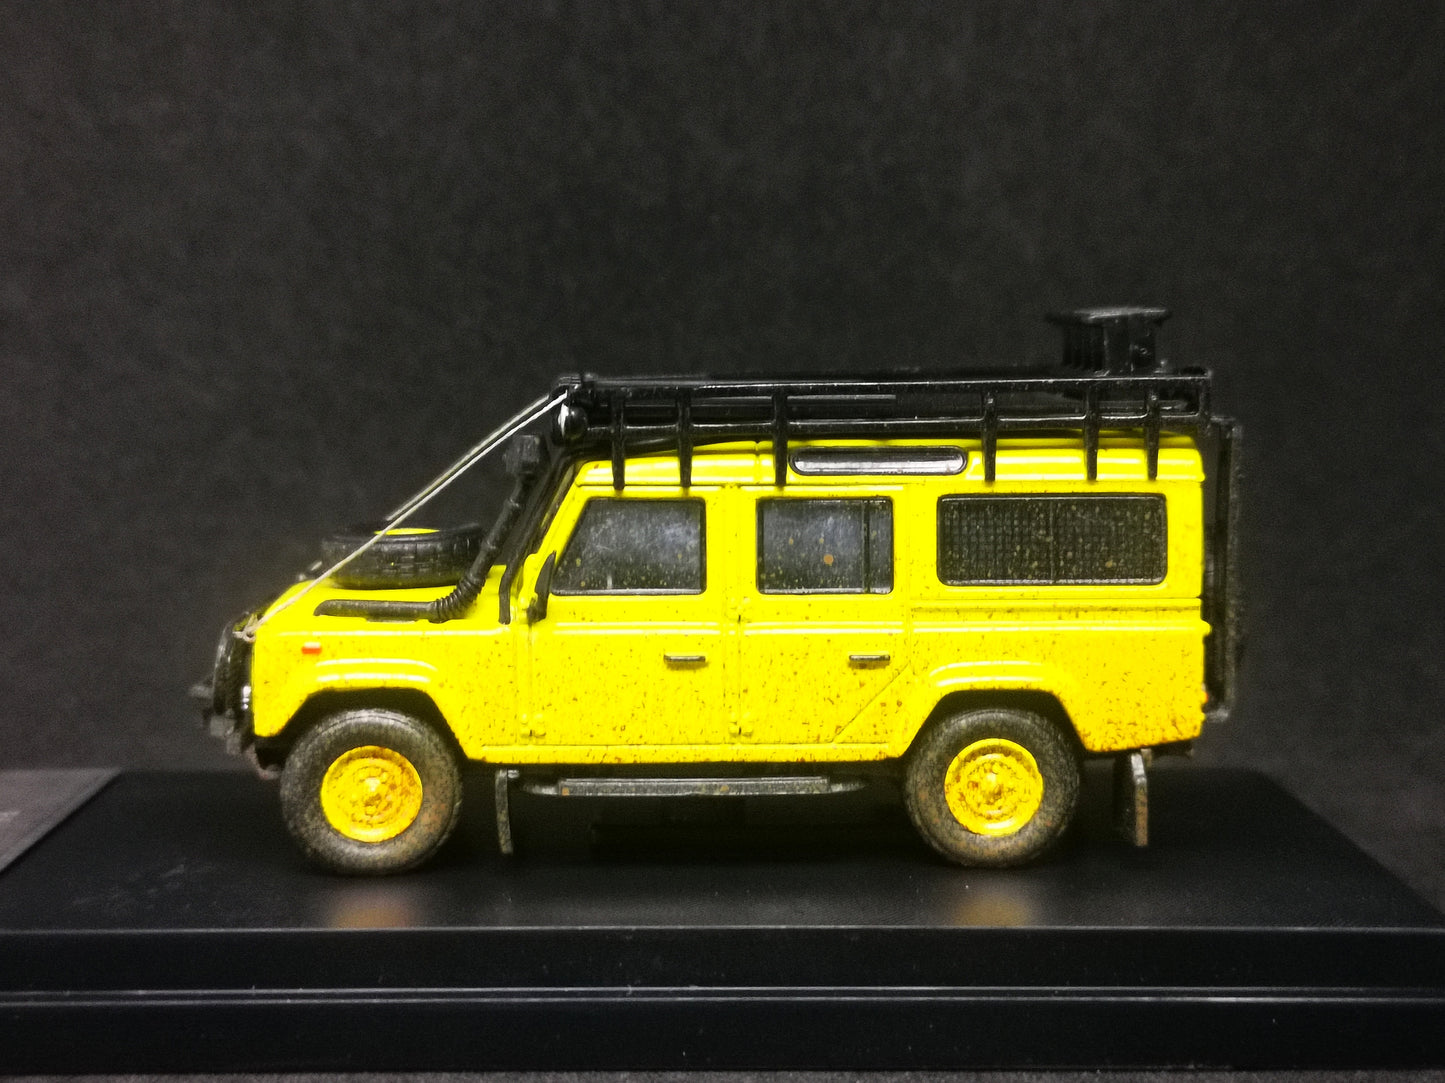 Master Model 1:64 Scale Camel Trophy Land Rover Defender 110 Dirty Ver. With Off Road Kits